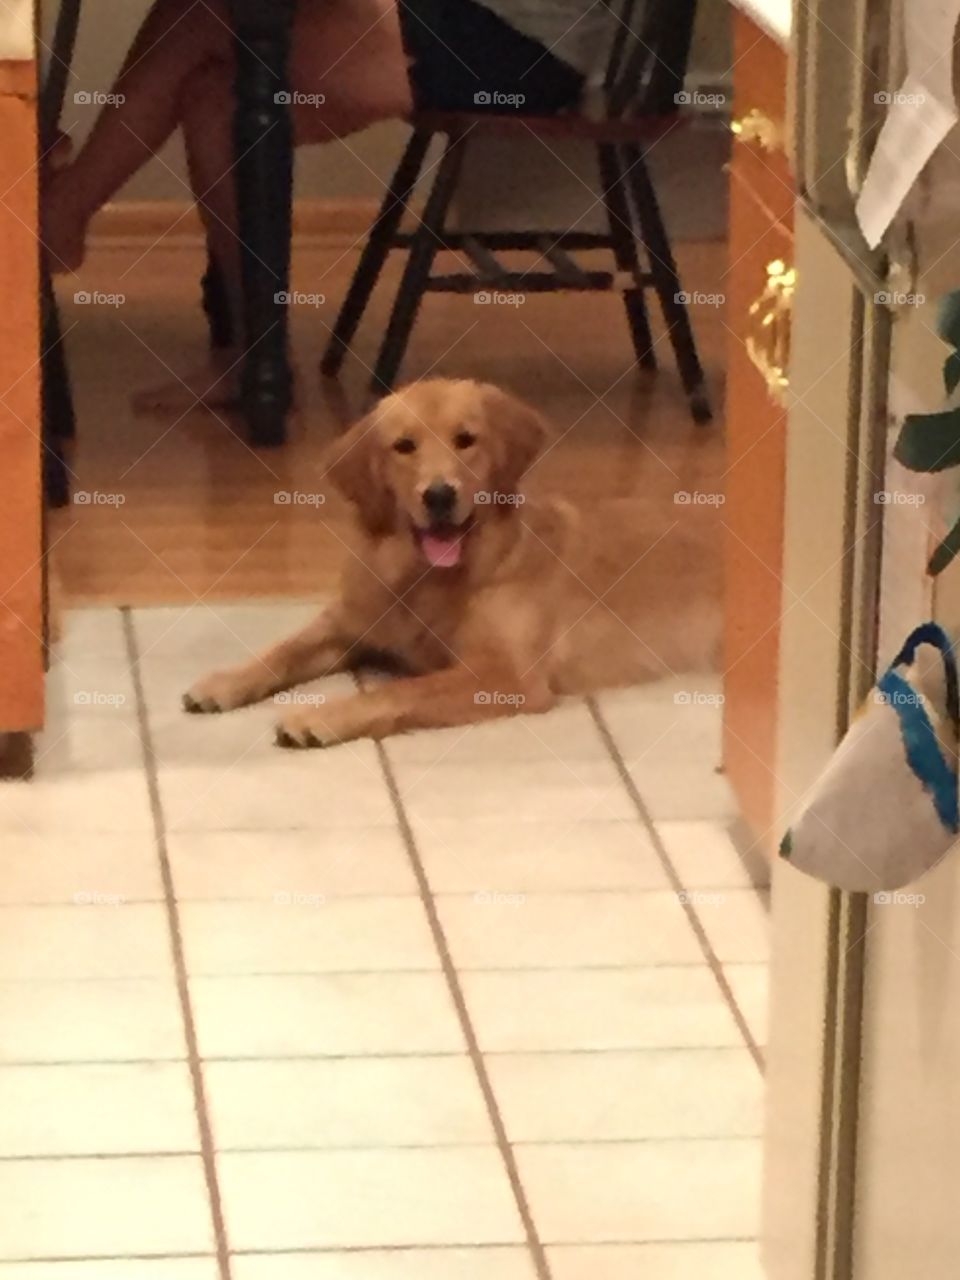 After running for a ball for a long while she was happy to lay on the cool floor